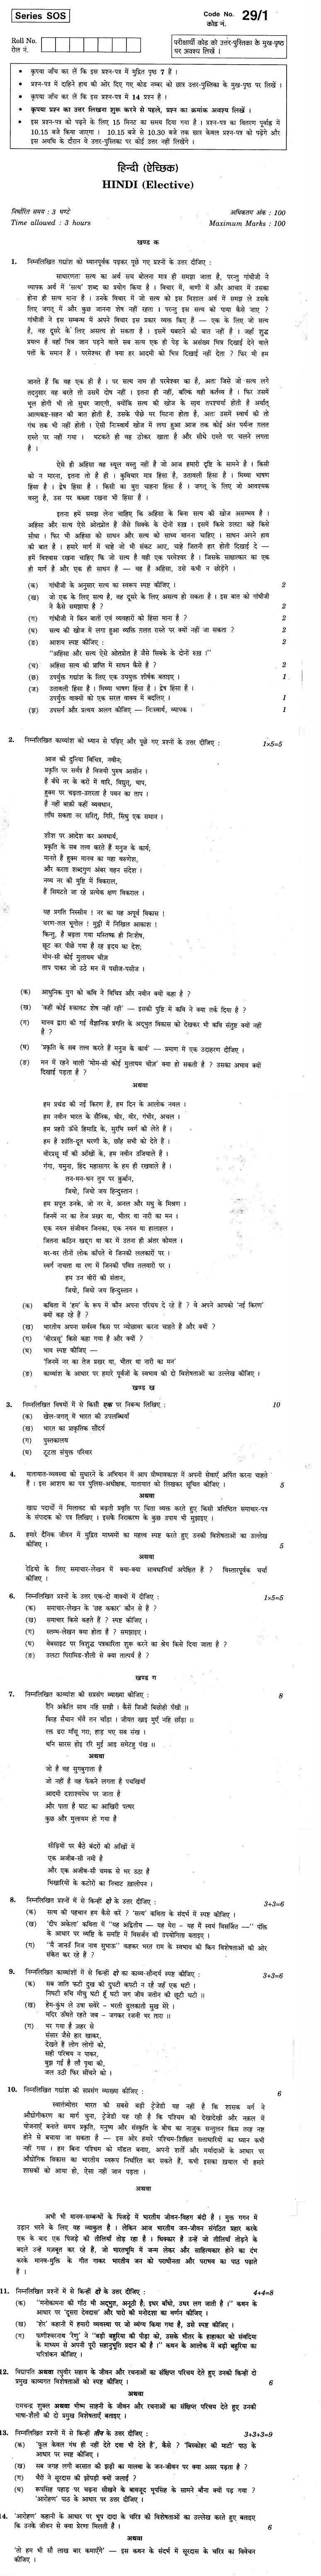 CBSE Class XII Previous Year Question Papers 2011 Hindi